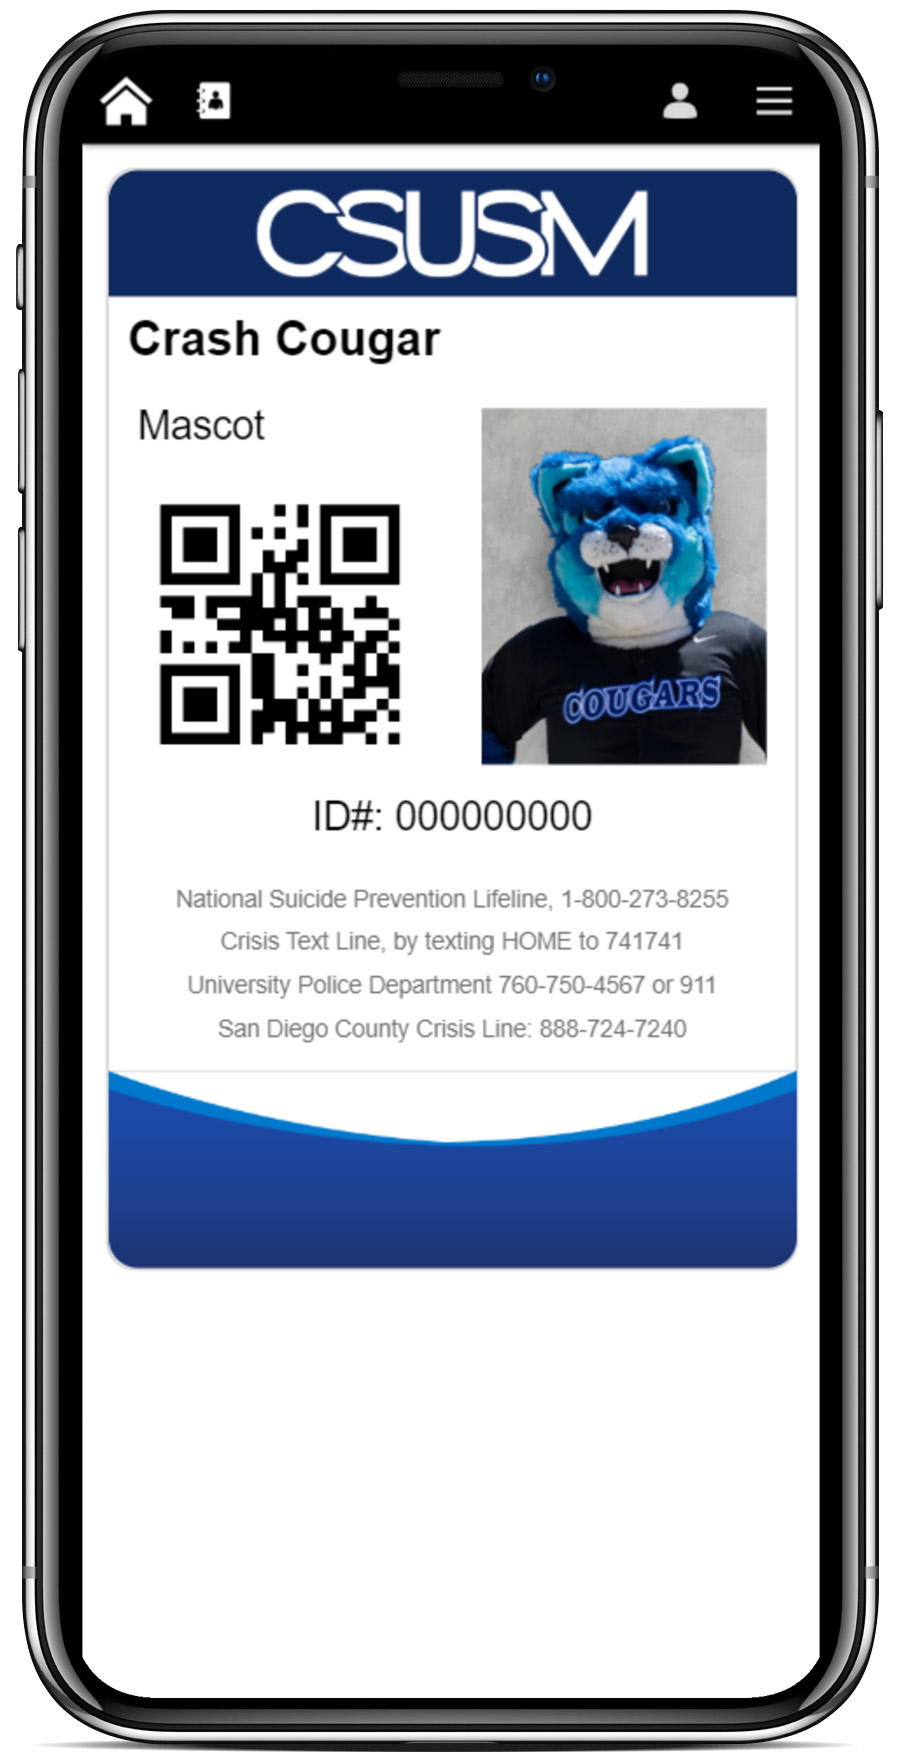 Crash the Cougar photo ID in phone app